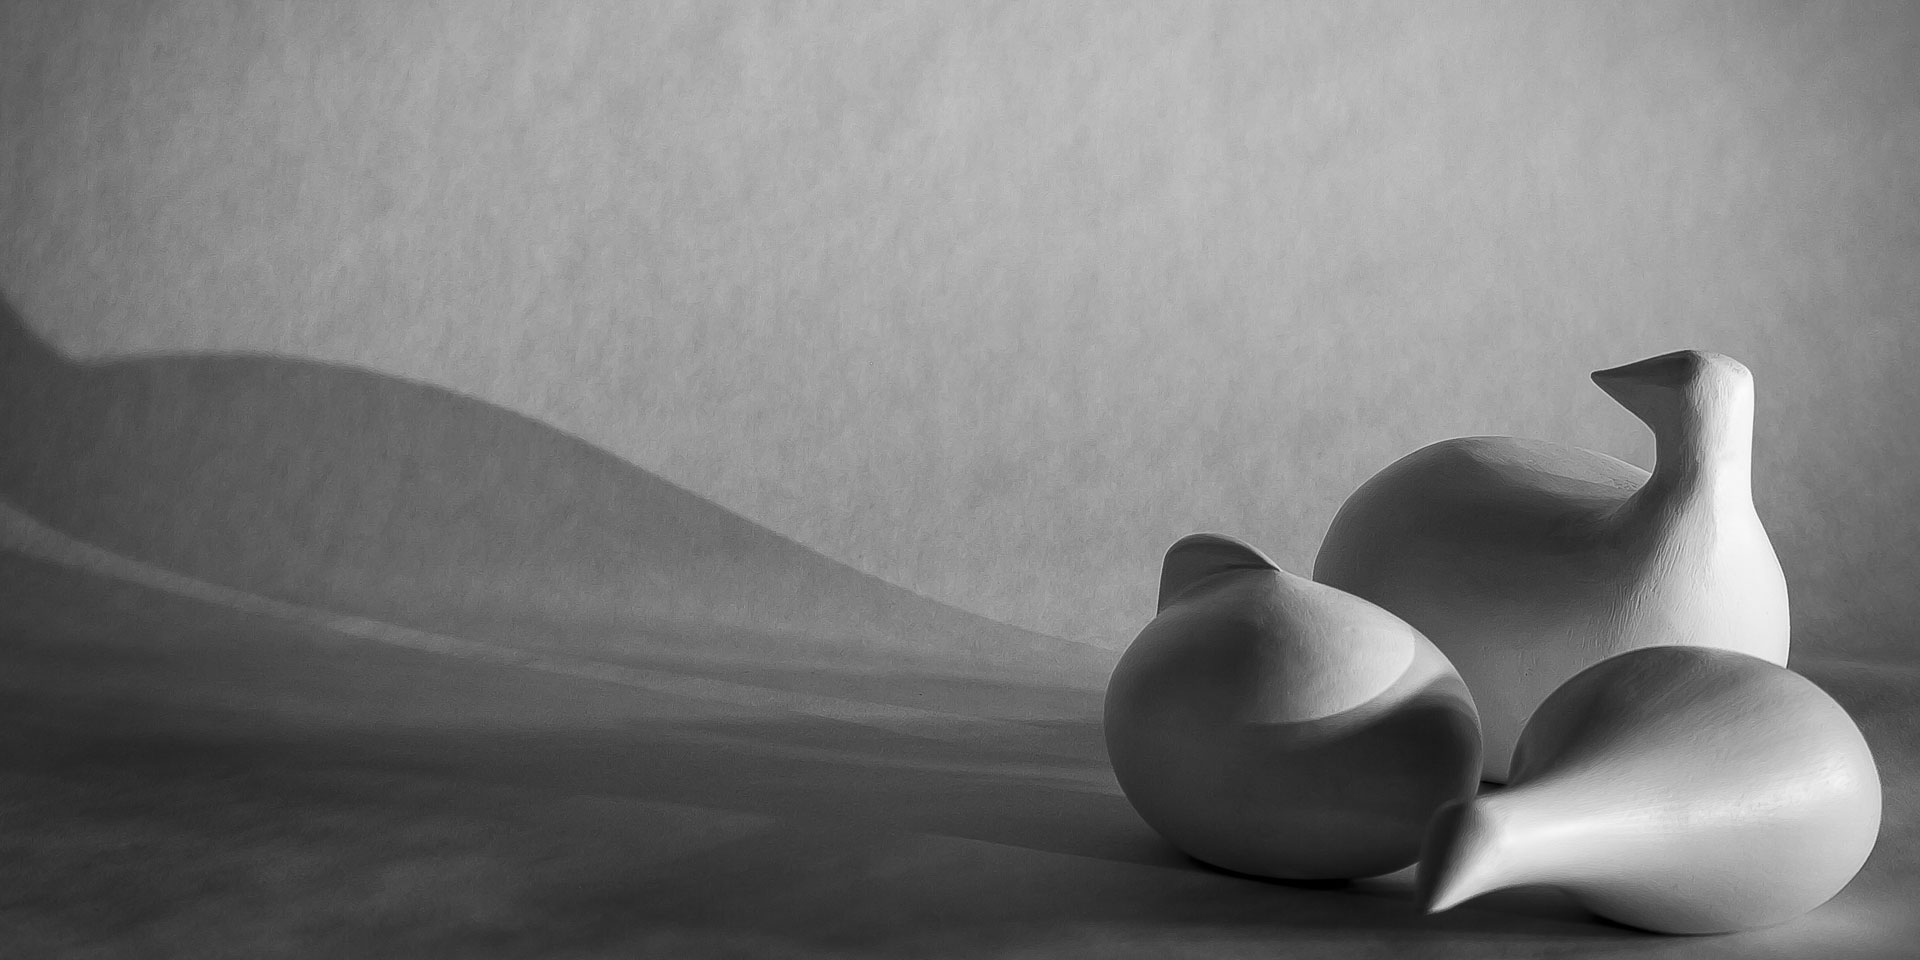 Black and white photographic still life of abstract wooden birds.